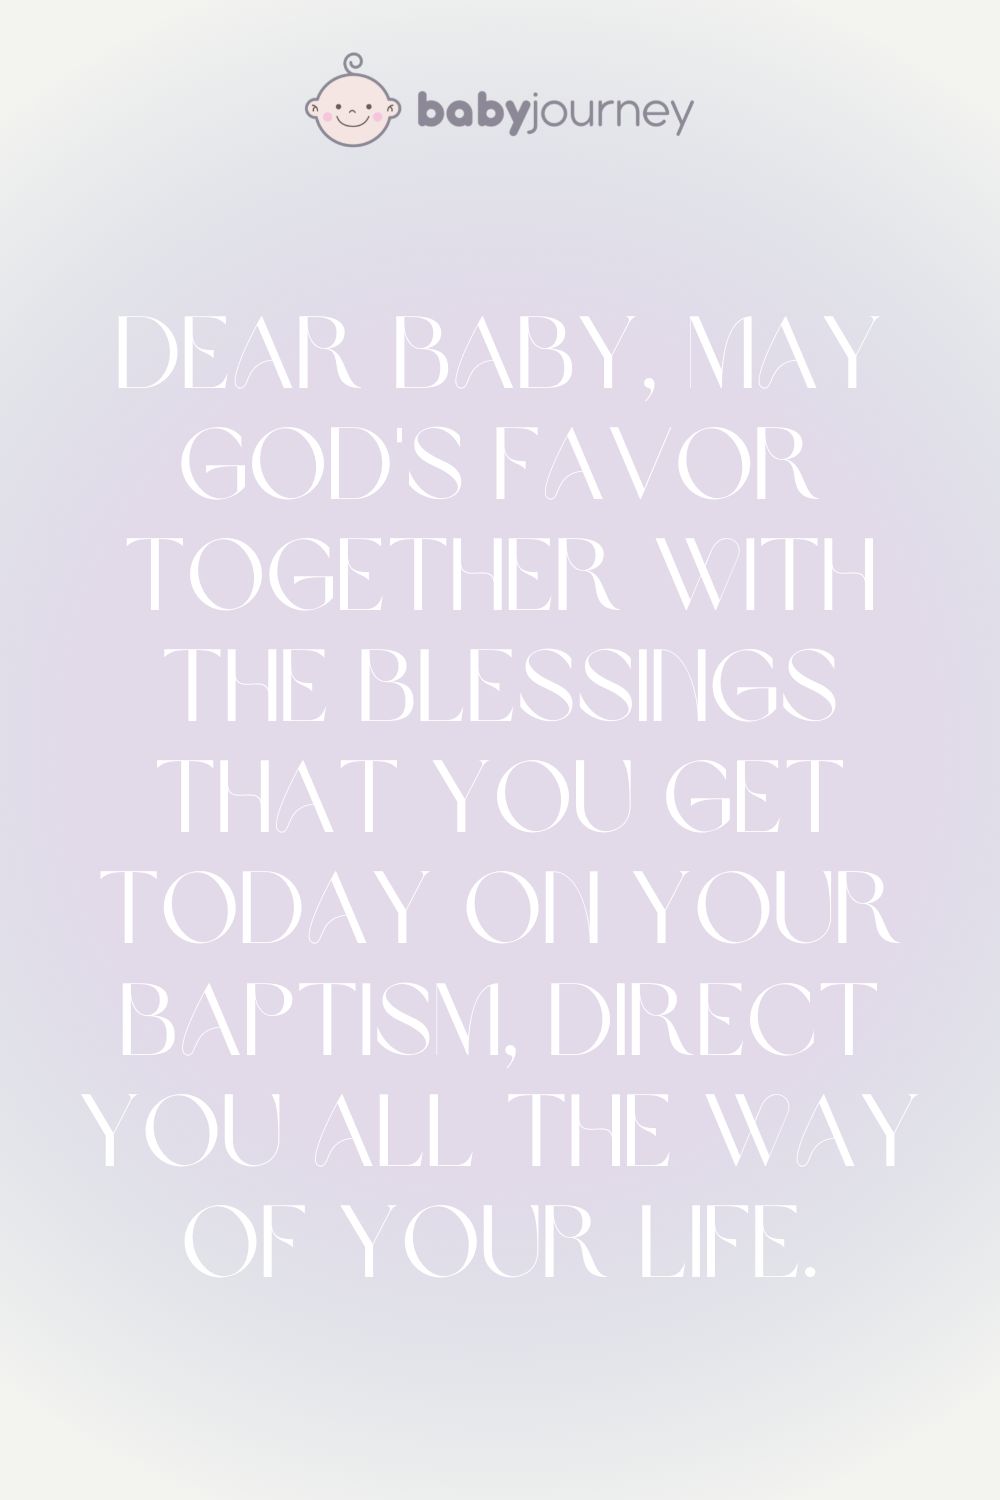 Dear Baby, May God's favor together with the blessings that you get today on your Baptism, direct you all the way of your life.- Sweet Baptism Words Sayings Quotes - Baby Journey